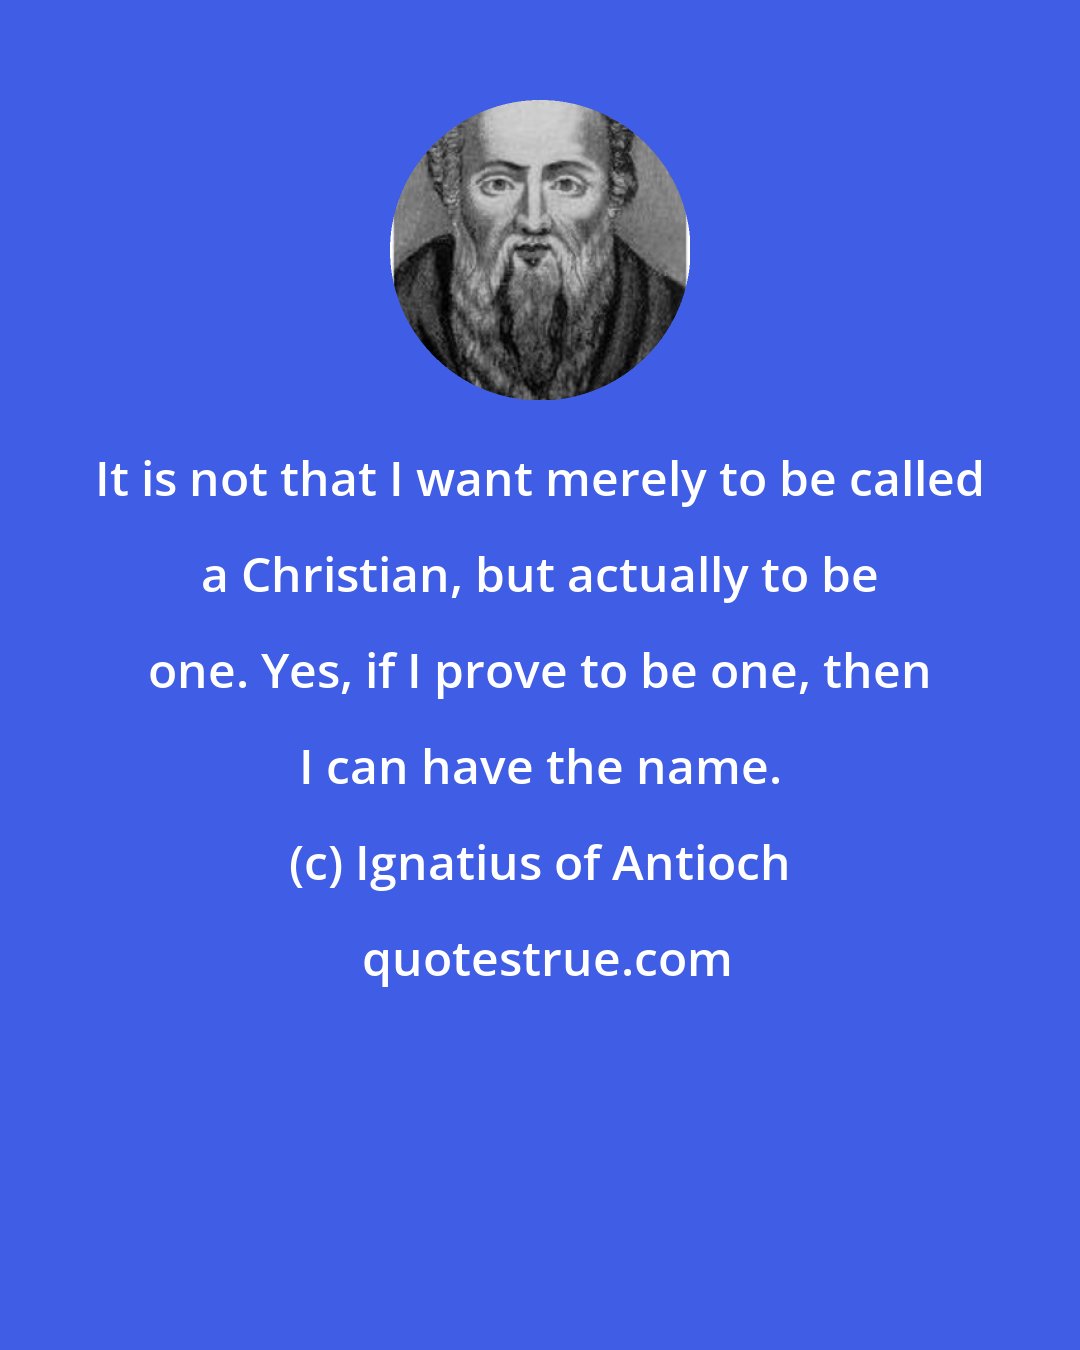 Ignatius of Antioch: It is not that I want merely to be called a Christian, but actually to be one. Yes, if I prove to be one, then I can have the name.